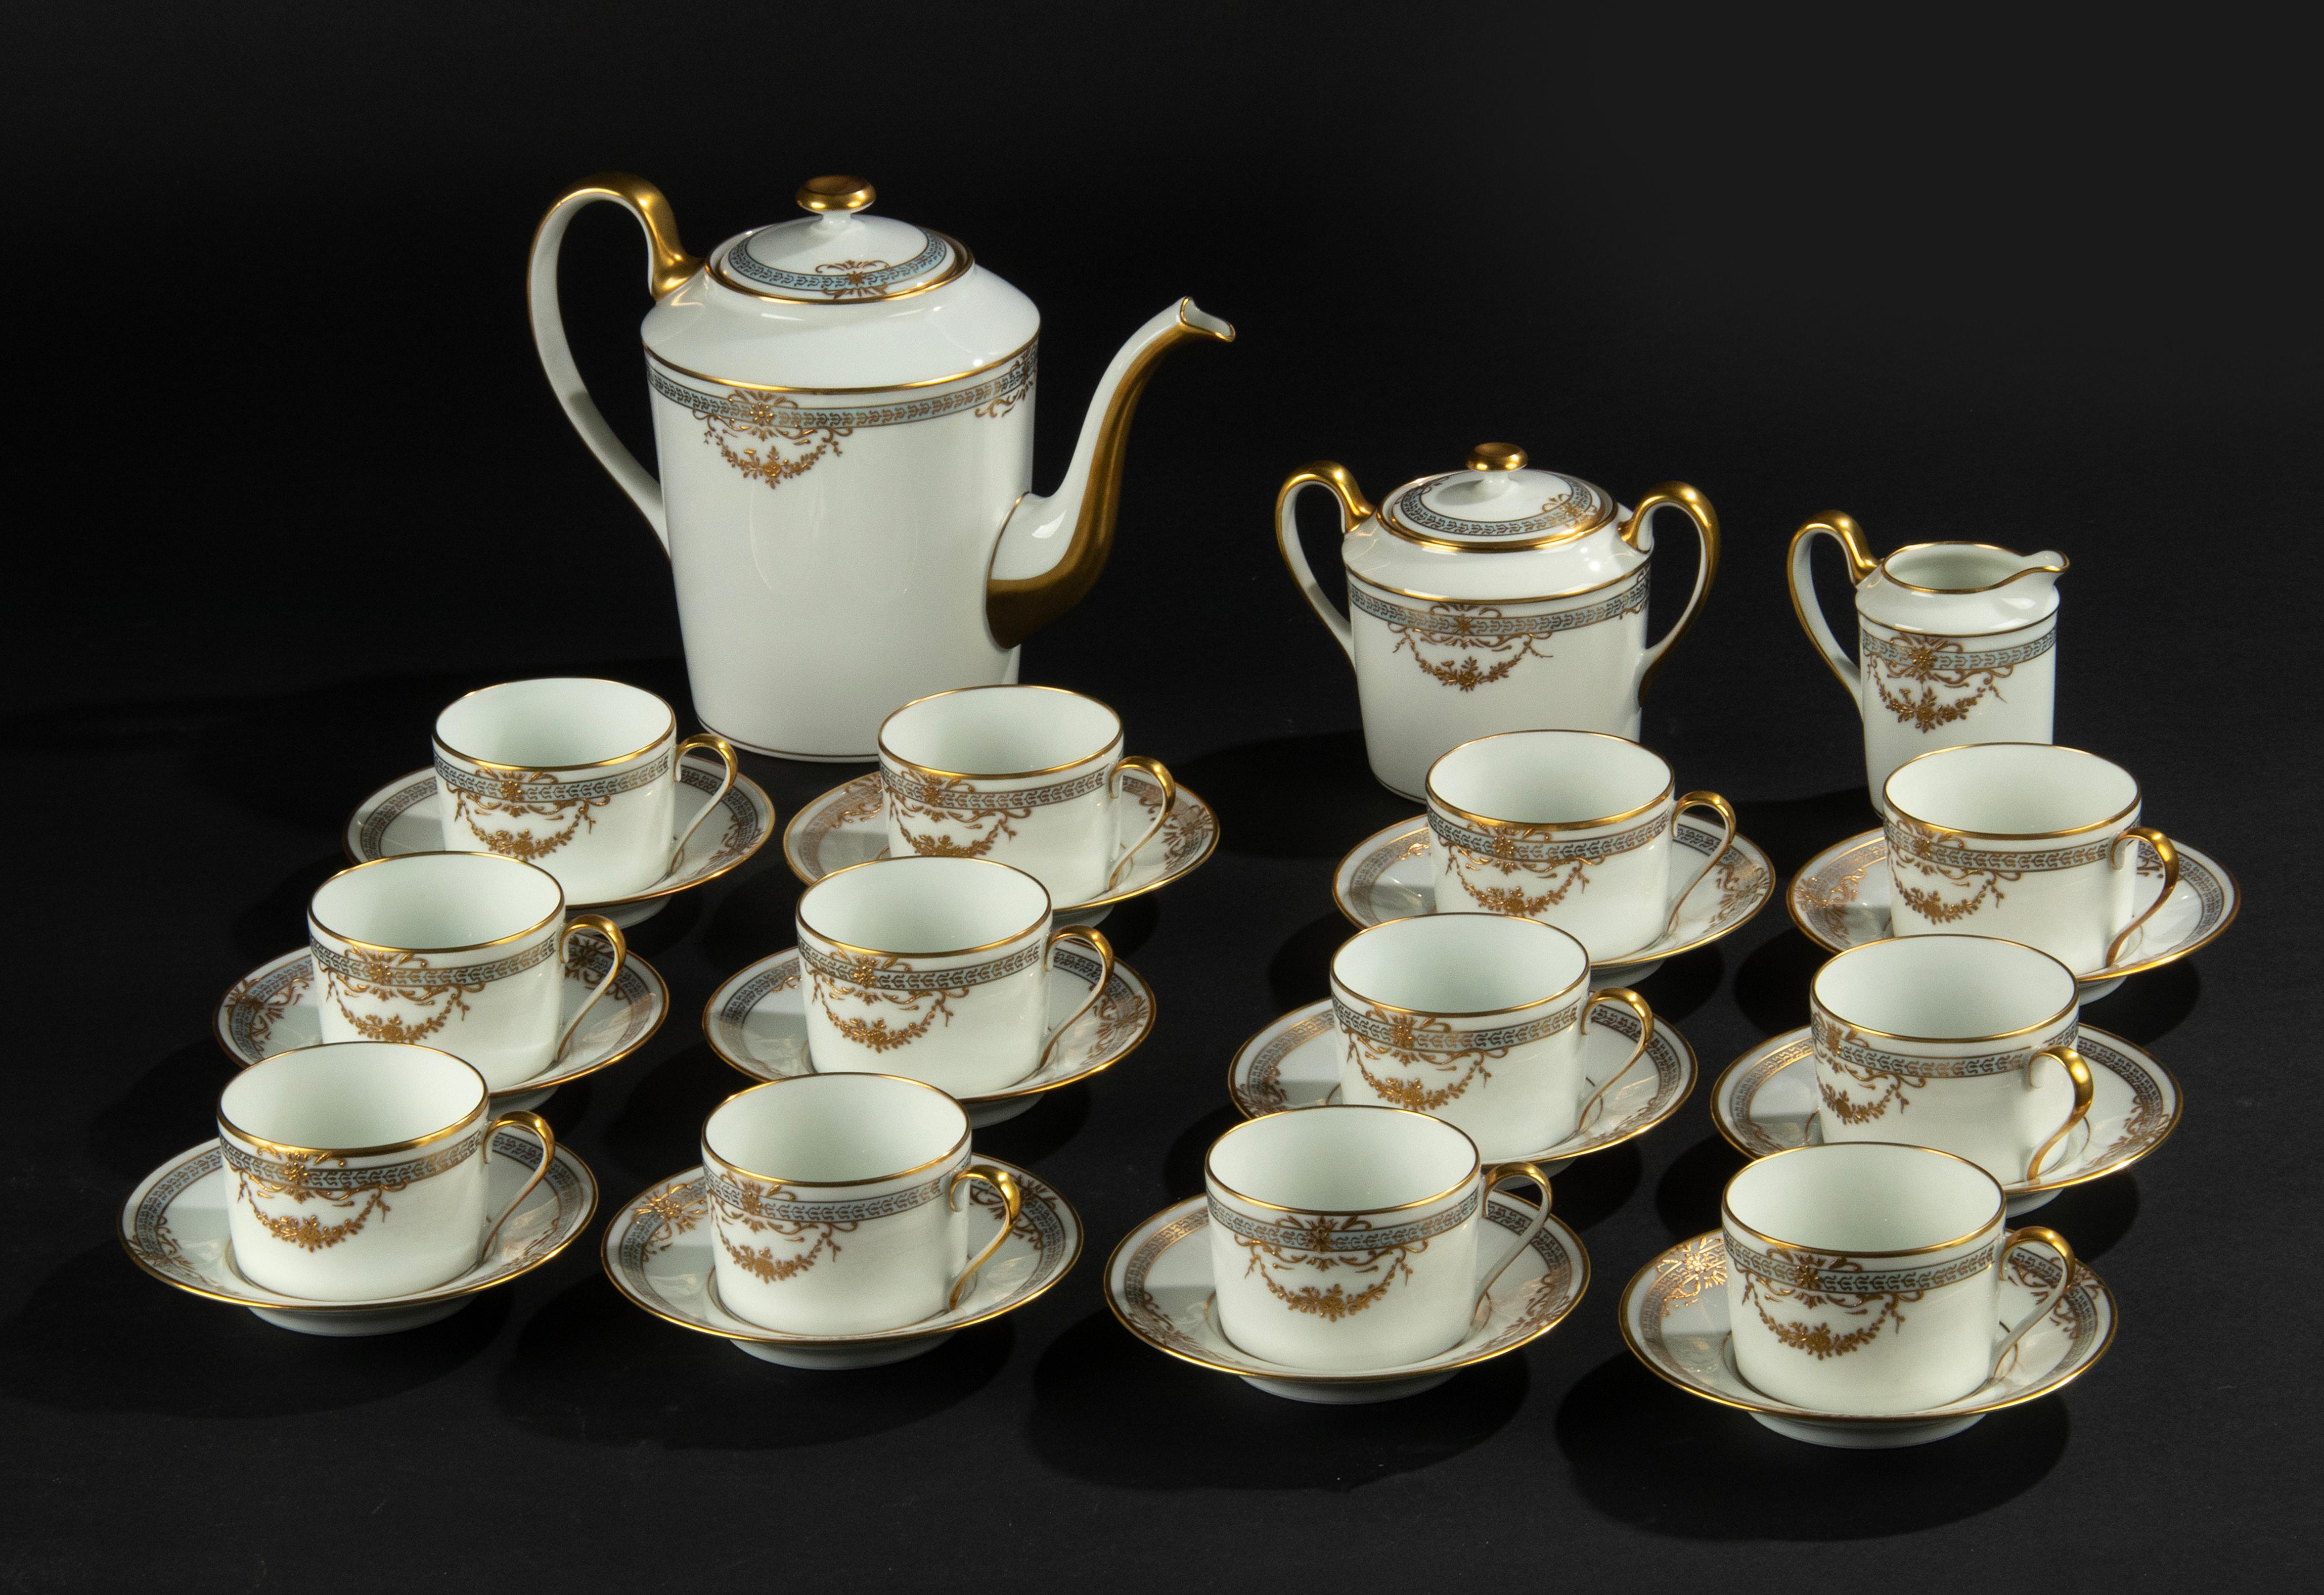 A beautiful porcelain tea set, made by the French brand Royal Limoges. 
This set is decorated with a light blue trim and elegant gold accents in relief: 'or en relief'. The porcelain is of a great quality, very refined. 
This set is in top